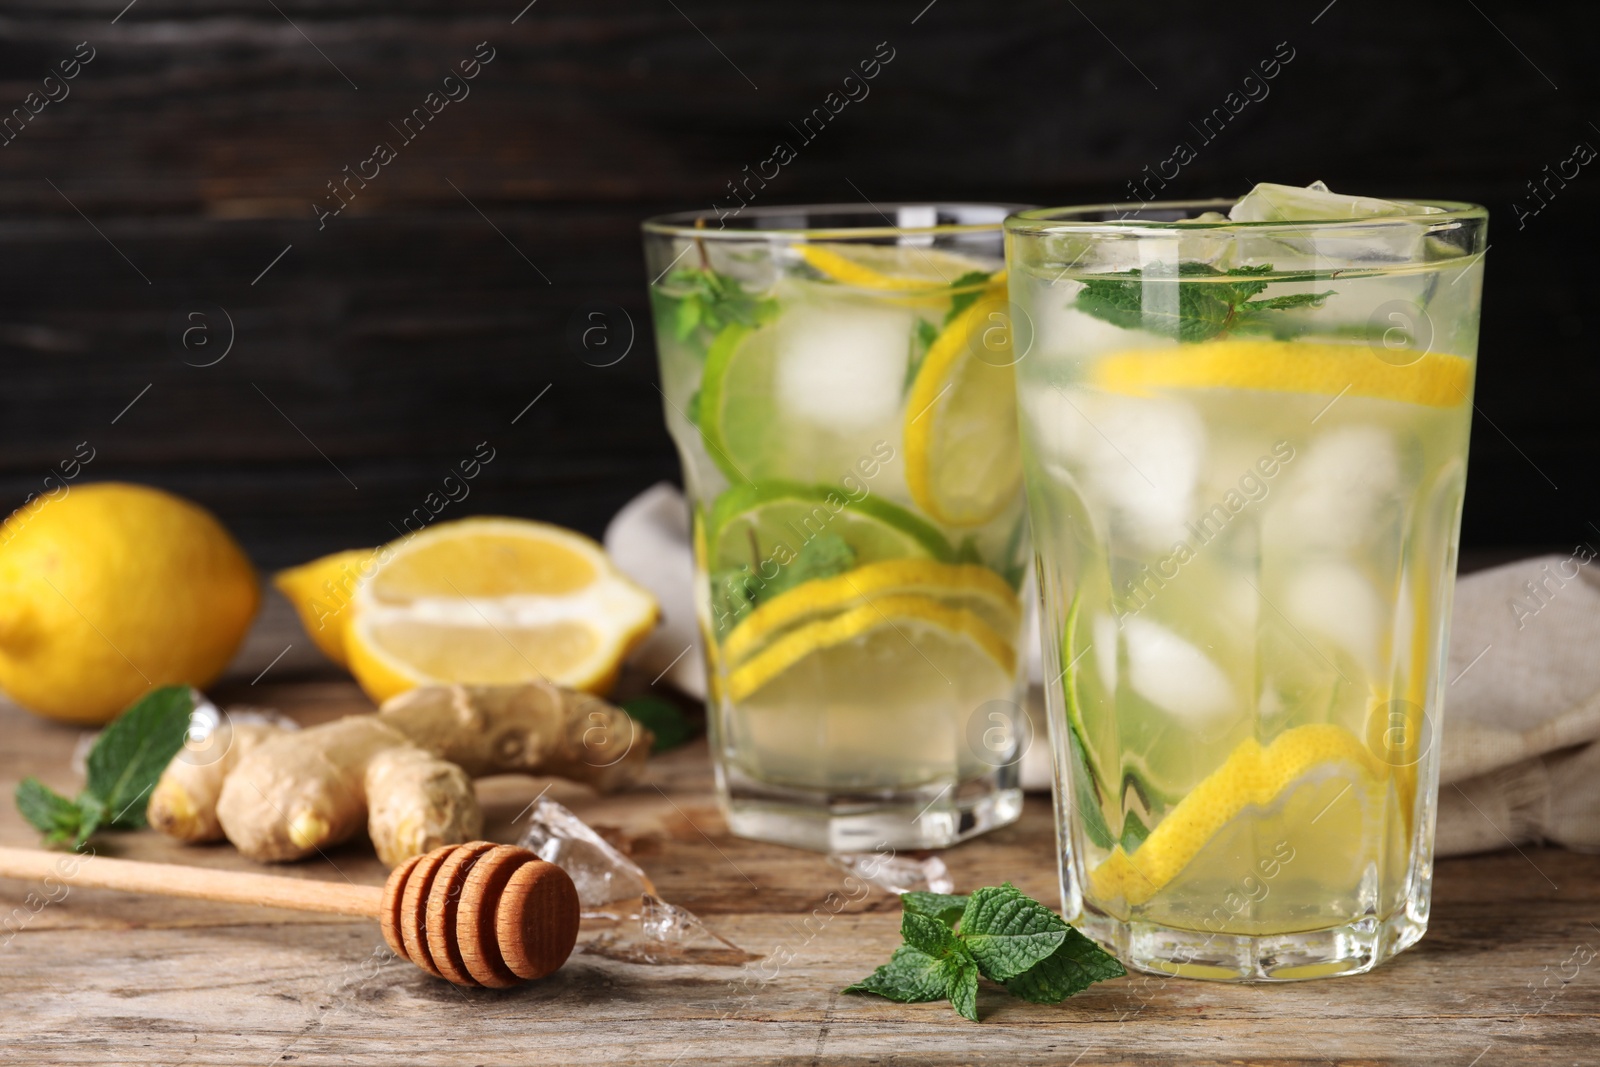 Photo of Glasses of refreshing drink with lemon and mint on wooden table against dark background, space for text